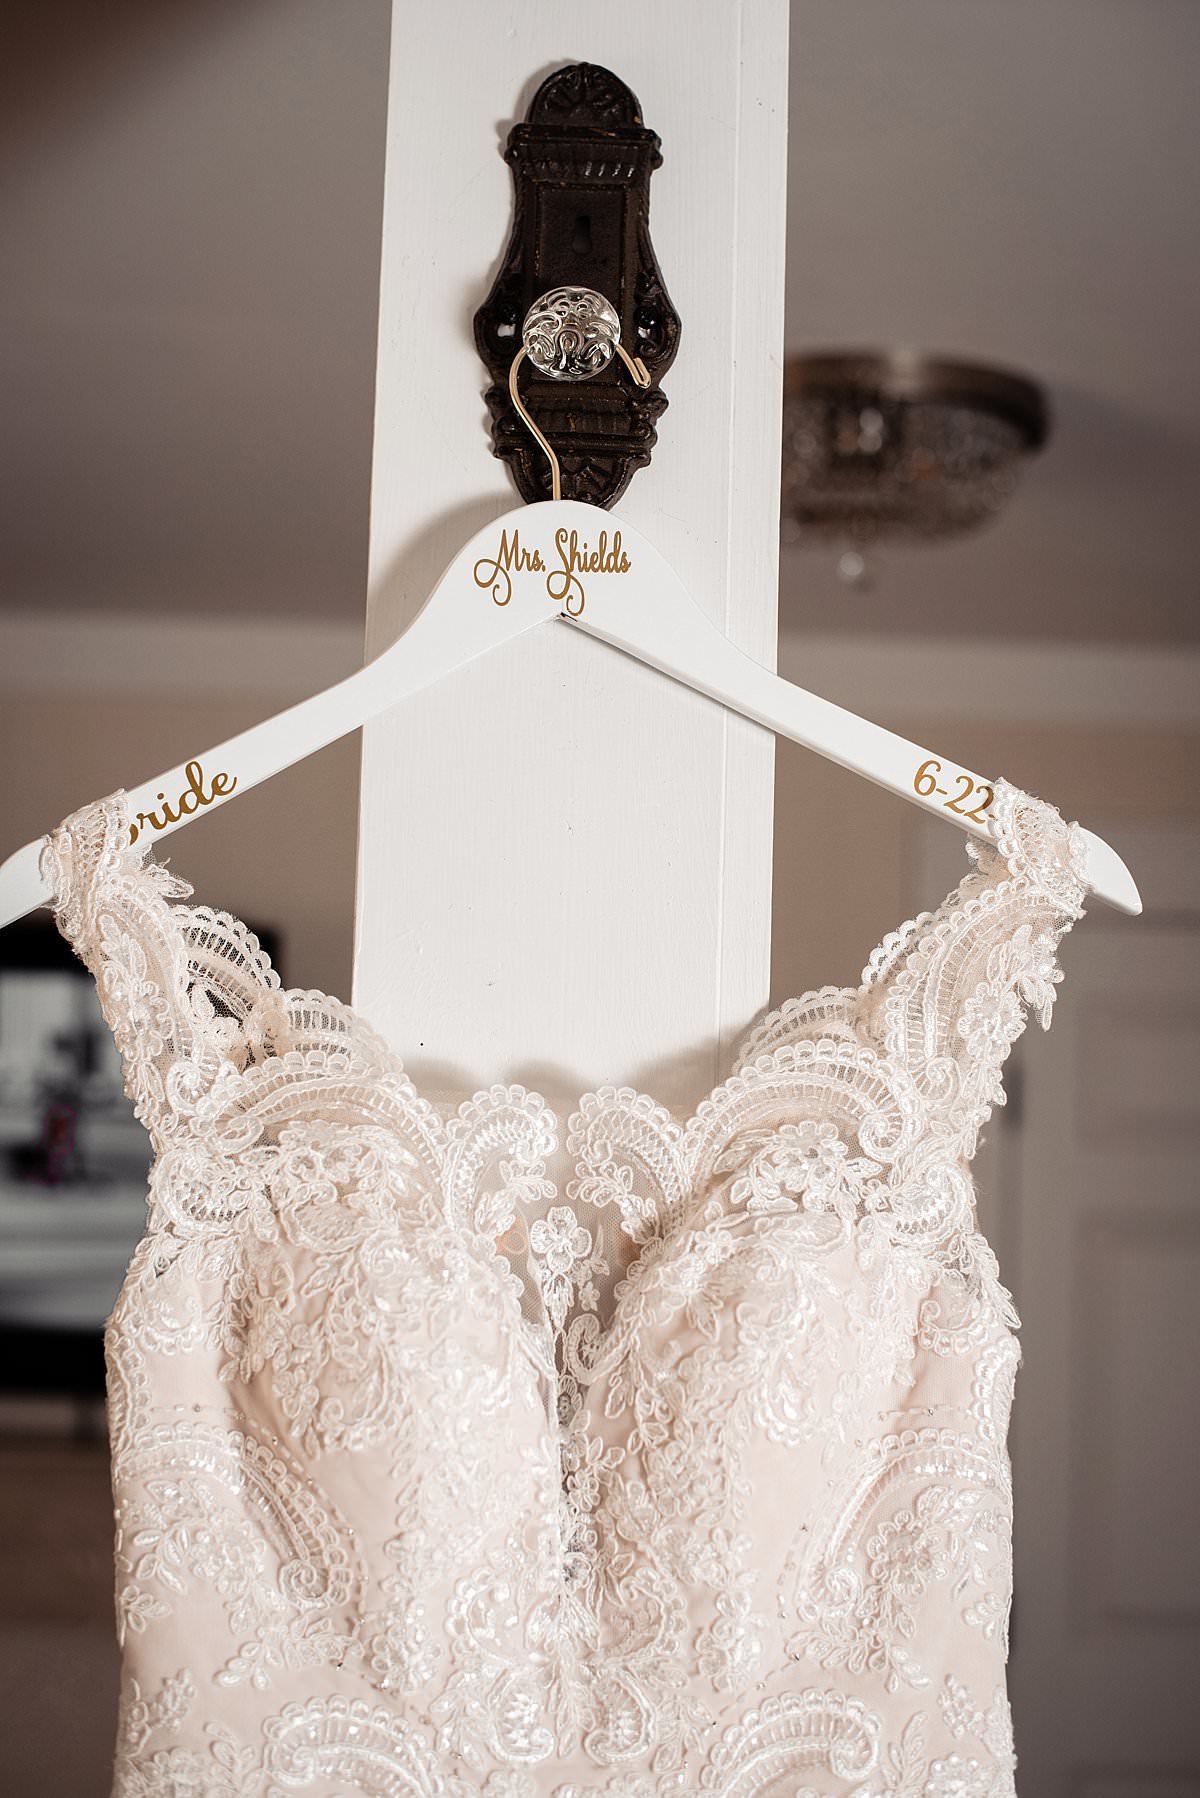 Brides wedding dress hanging on a custom white hanger with calligraphy